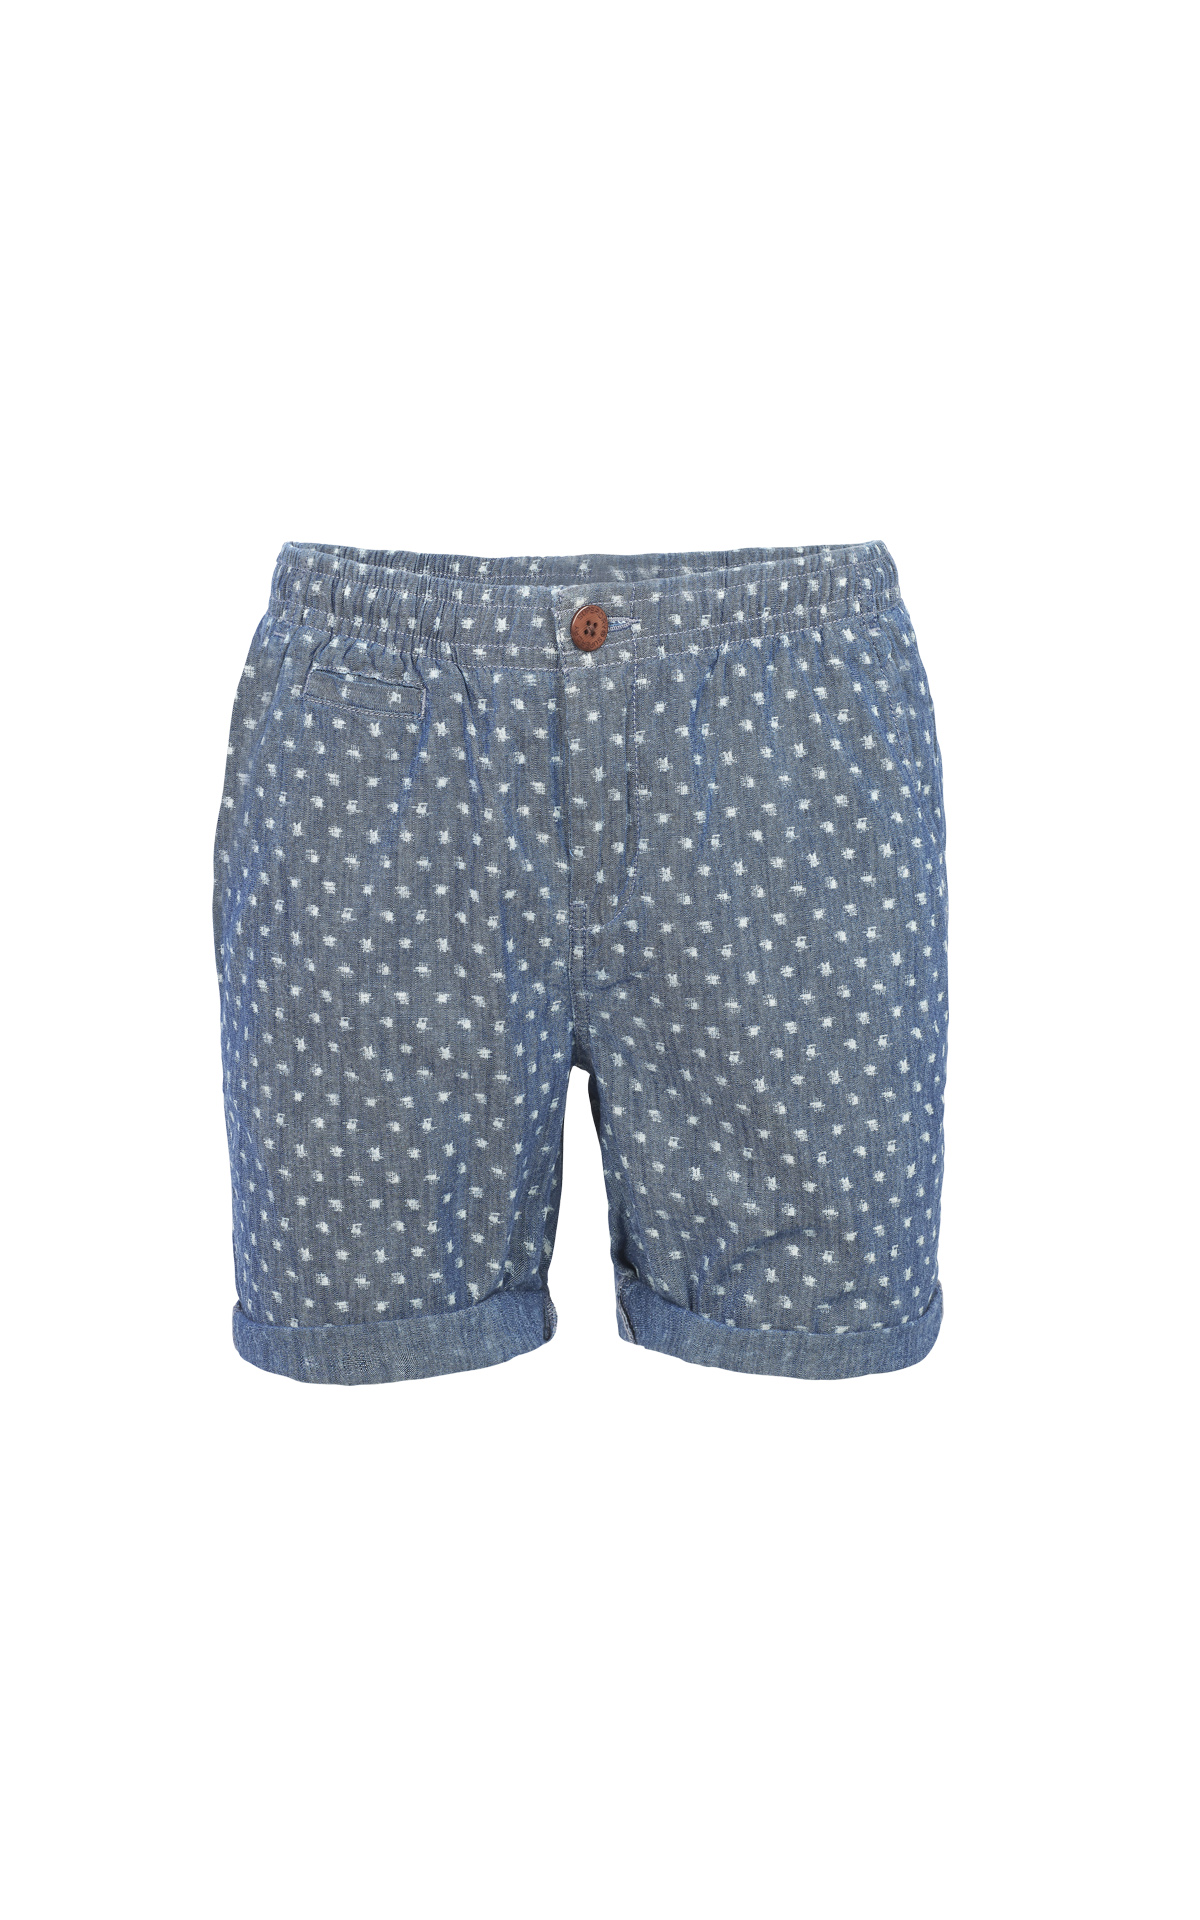 SUNCORCHED CHINO SHORT Superdry